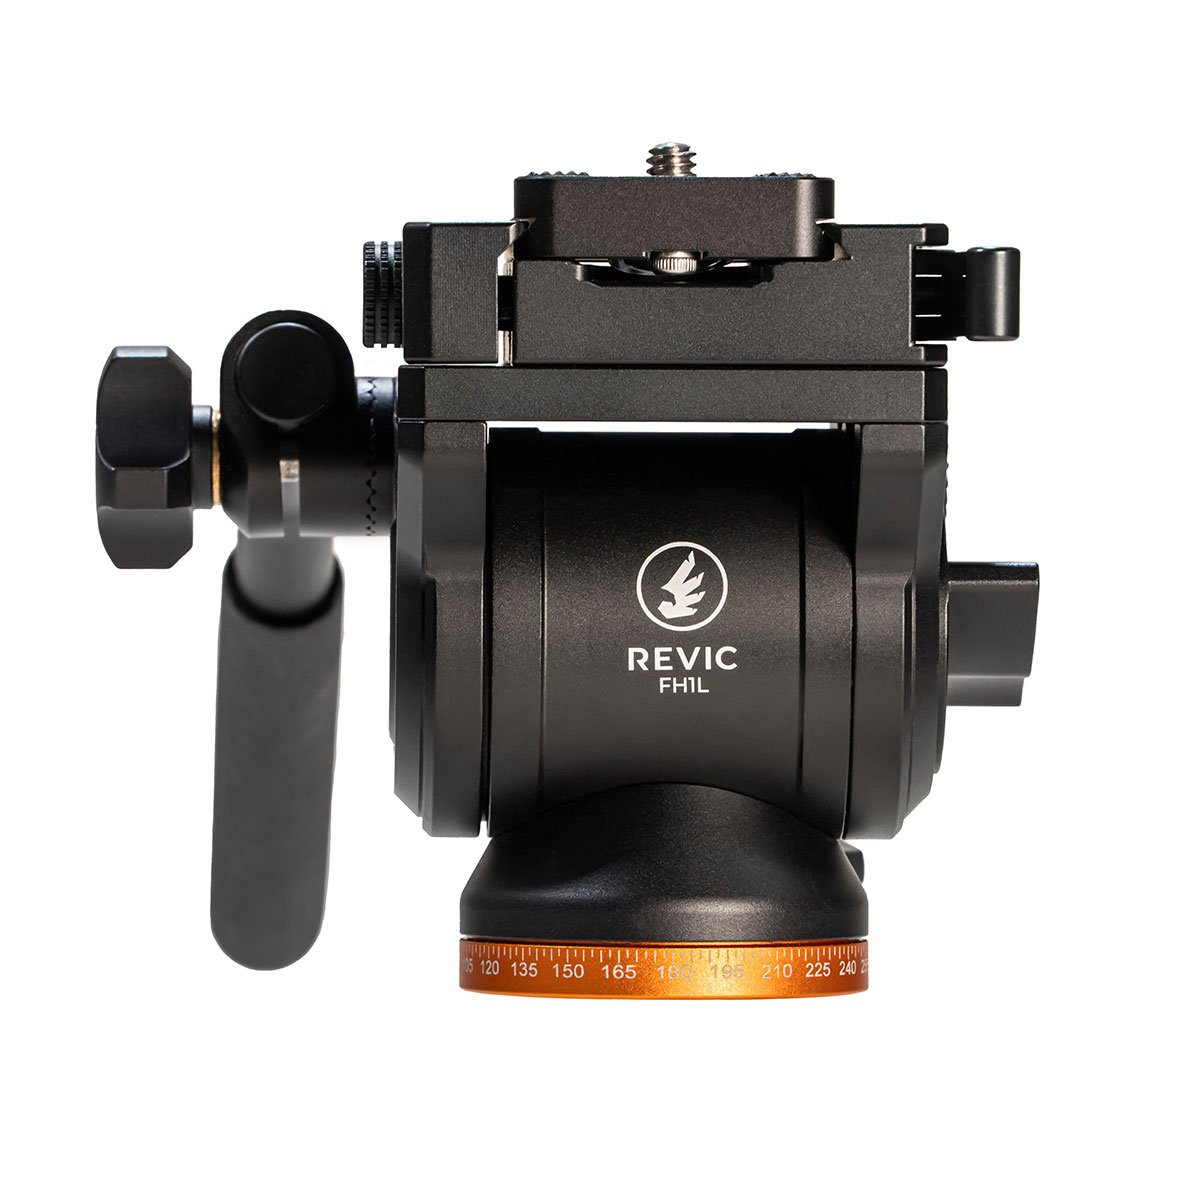 REVIC OPTICS - FH1L FLUID HEAD WITH LEVER CLAMP